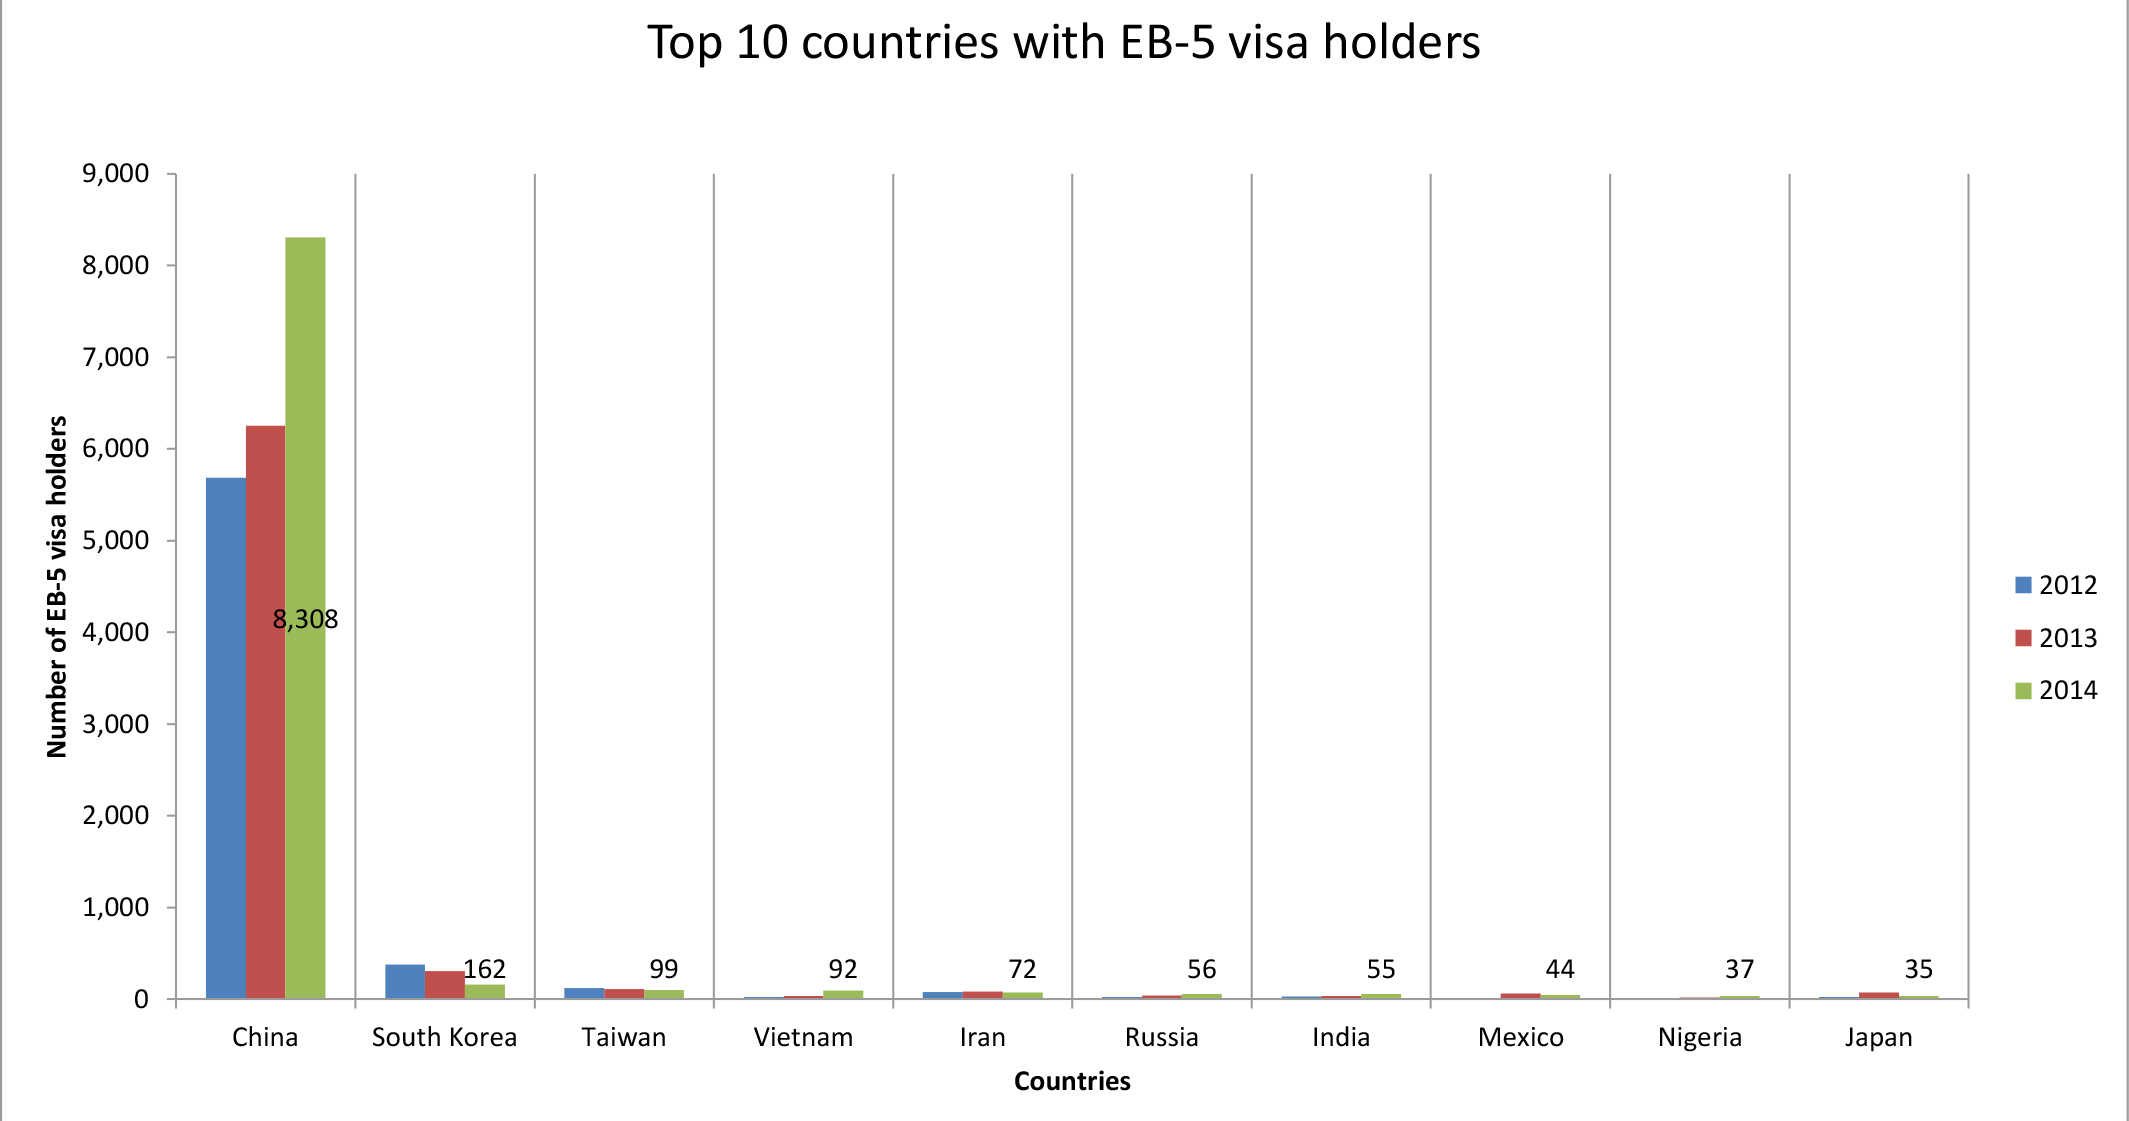 The top 10 countries producing EB-5 visa holders from 2012 to 2014